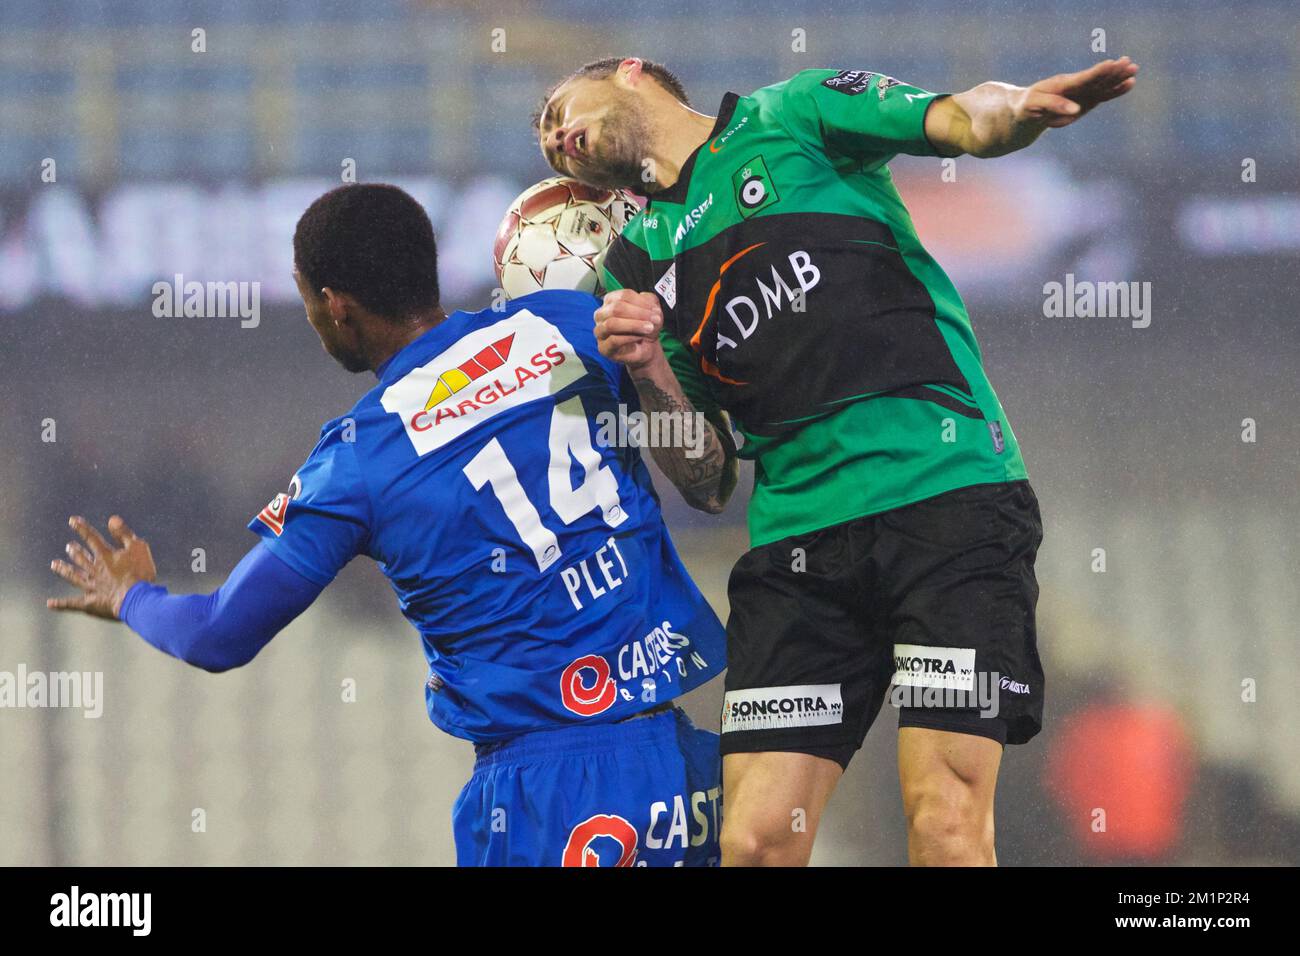 20121117 - BRUGGE, BELGIUM: Genk's Glynor Plet and Cercle's Anthony Portier fight for the ball during the Jupiler Pro League match between Cercle Brugge KSV and KRC Genk, in Brugge, Saturday 17 November 2012, on day 16 of the Belgian soccer championship. BELGA PHOTO KURT DESPLENTER Stock Photo